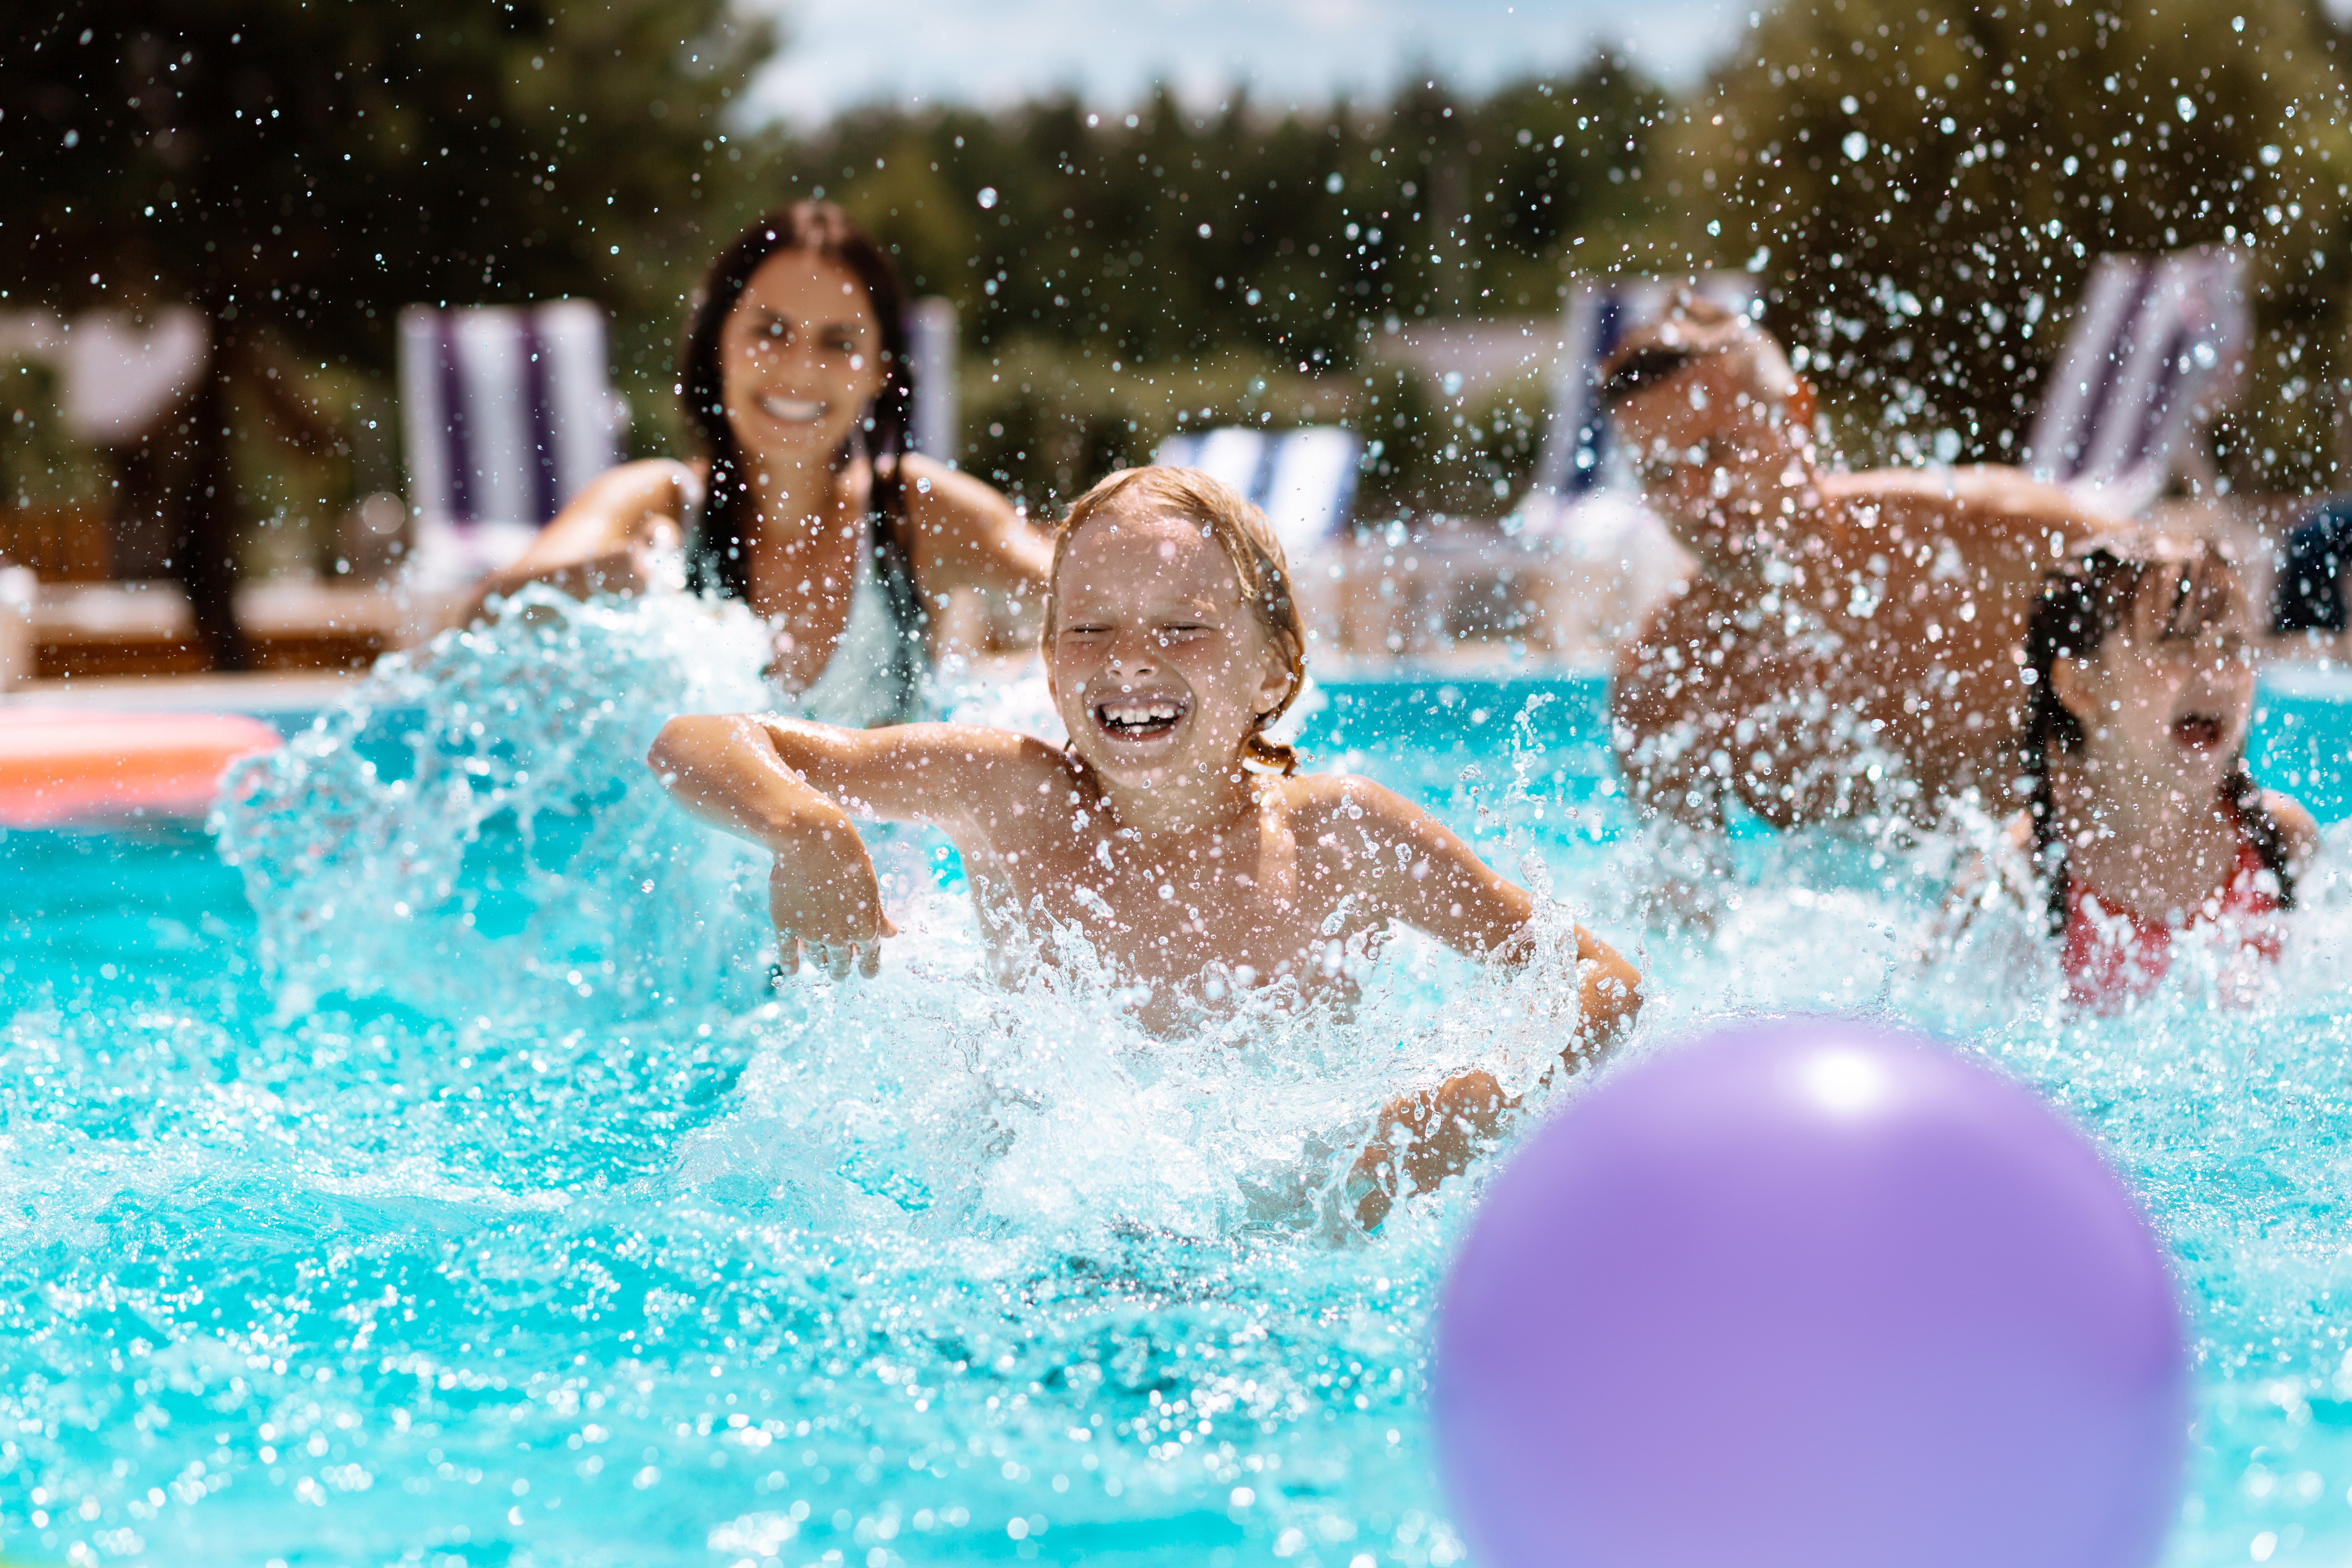 Pool Safety Tips Every Parent Should Know